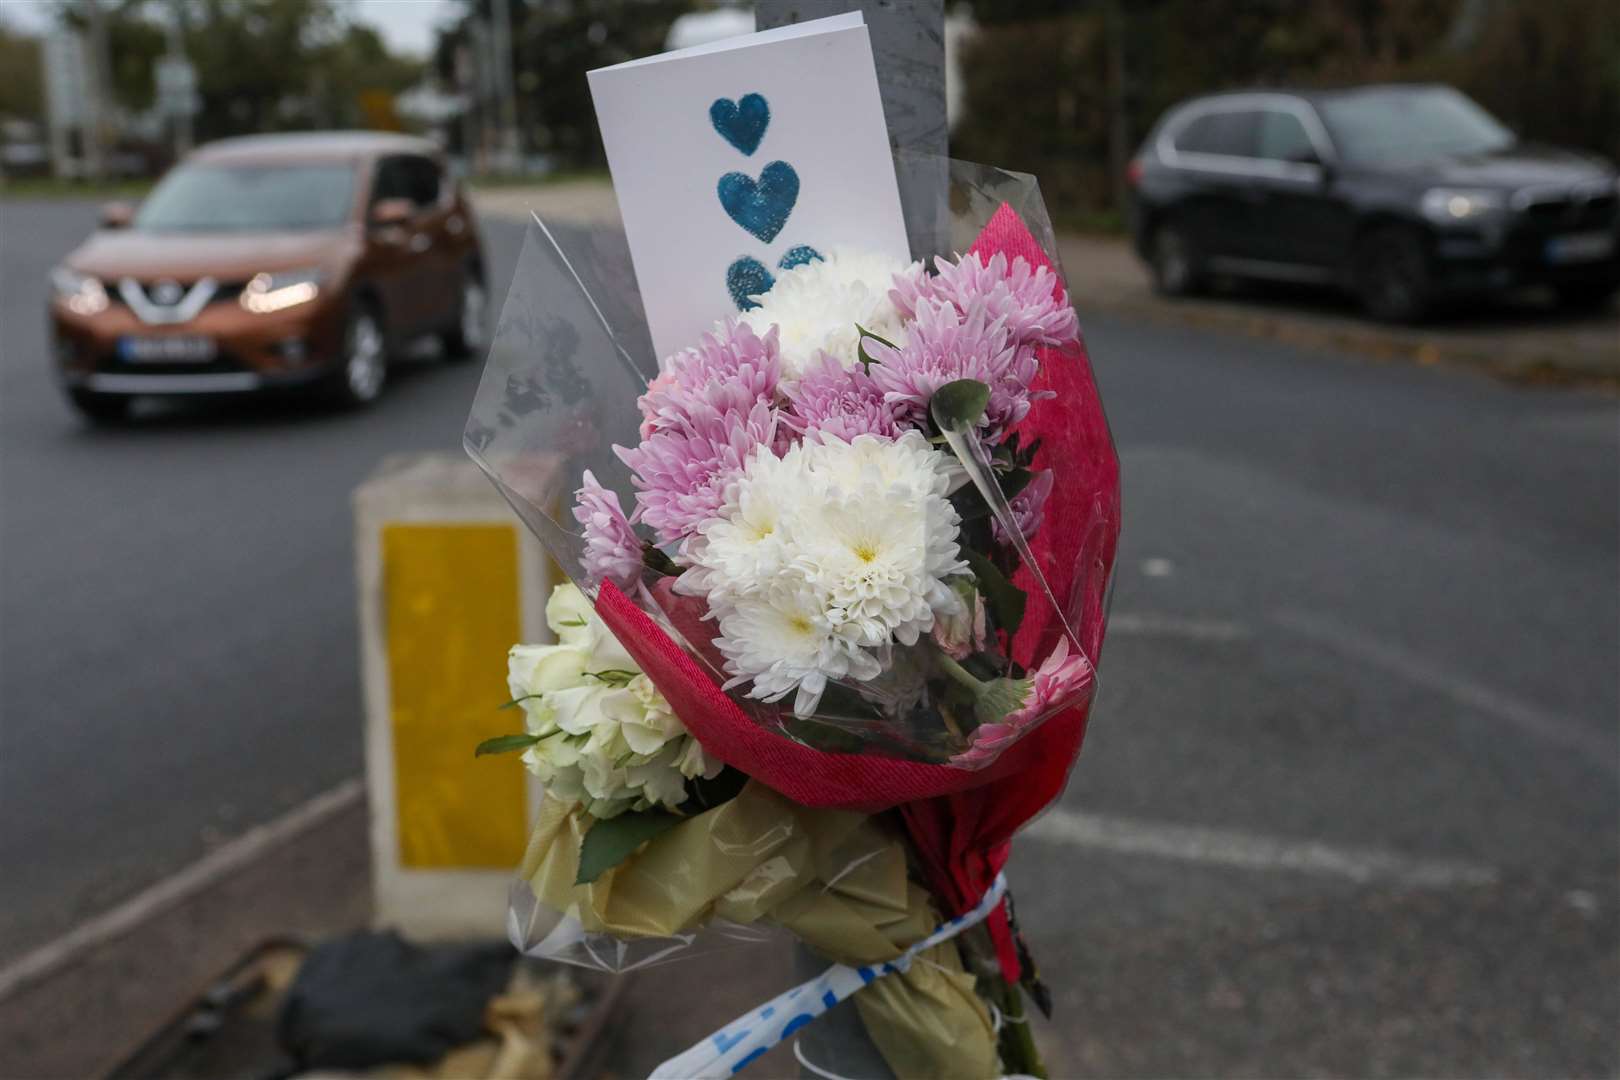 Flowers in memory of Mya at the scene of the tragedy